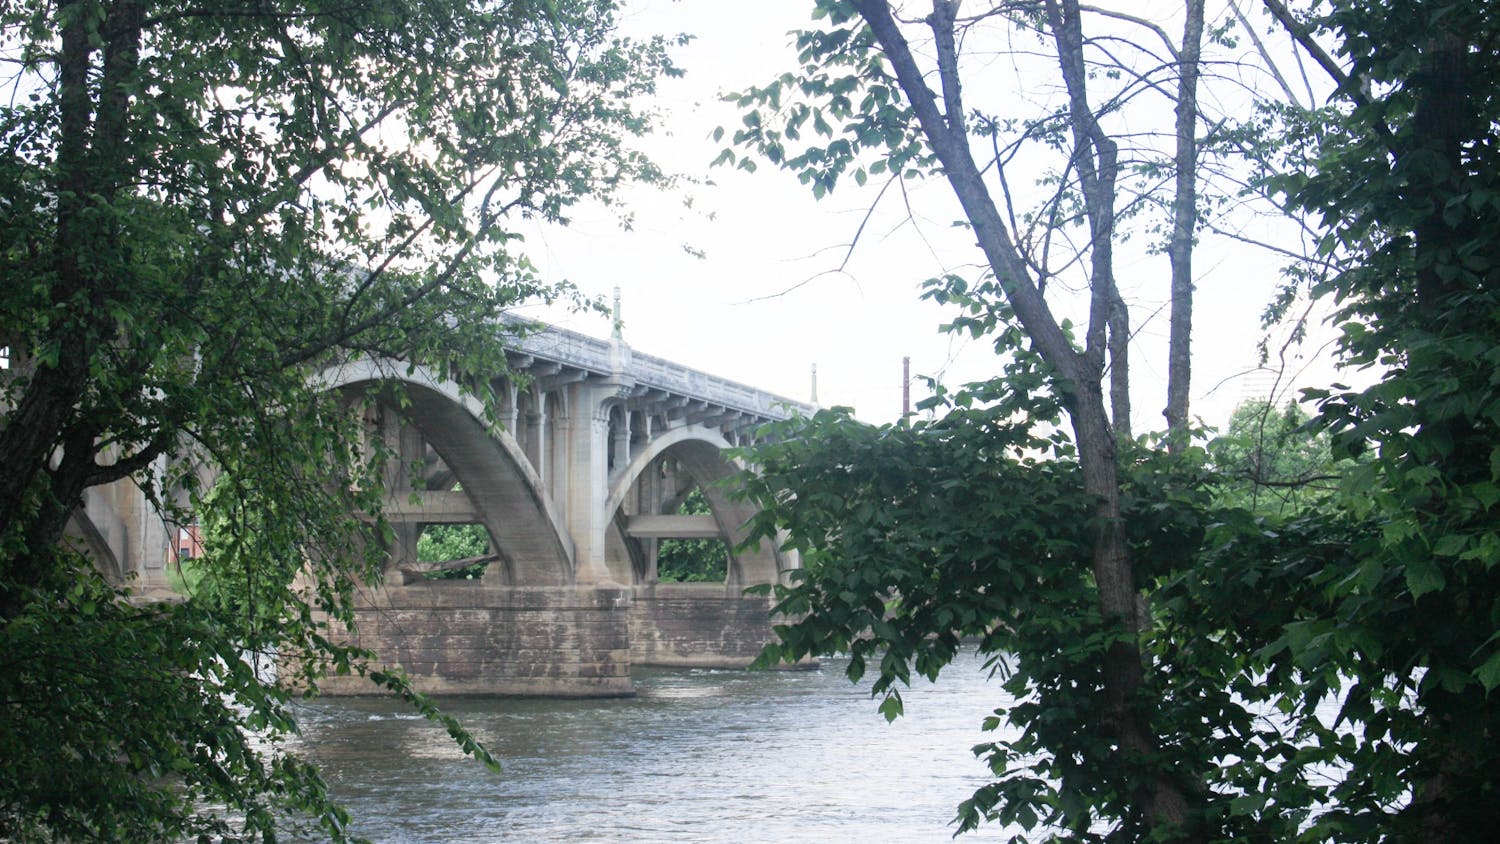 The Gervais Street Bridge crossing the Congaree River on May 27, 2022. The bridge stands right next to West Columbia Riverwalk Park.